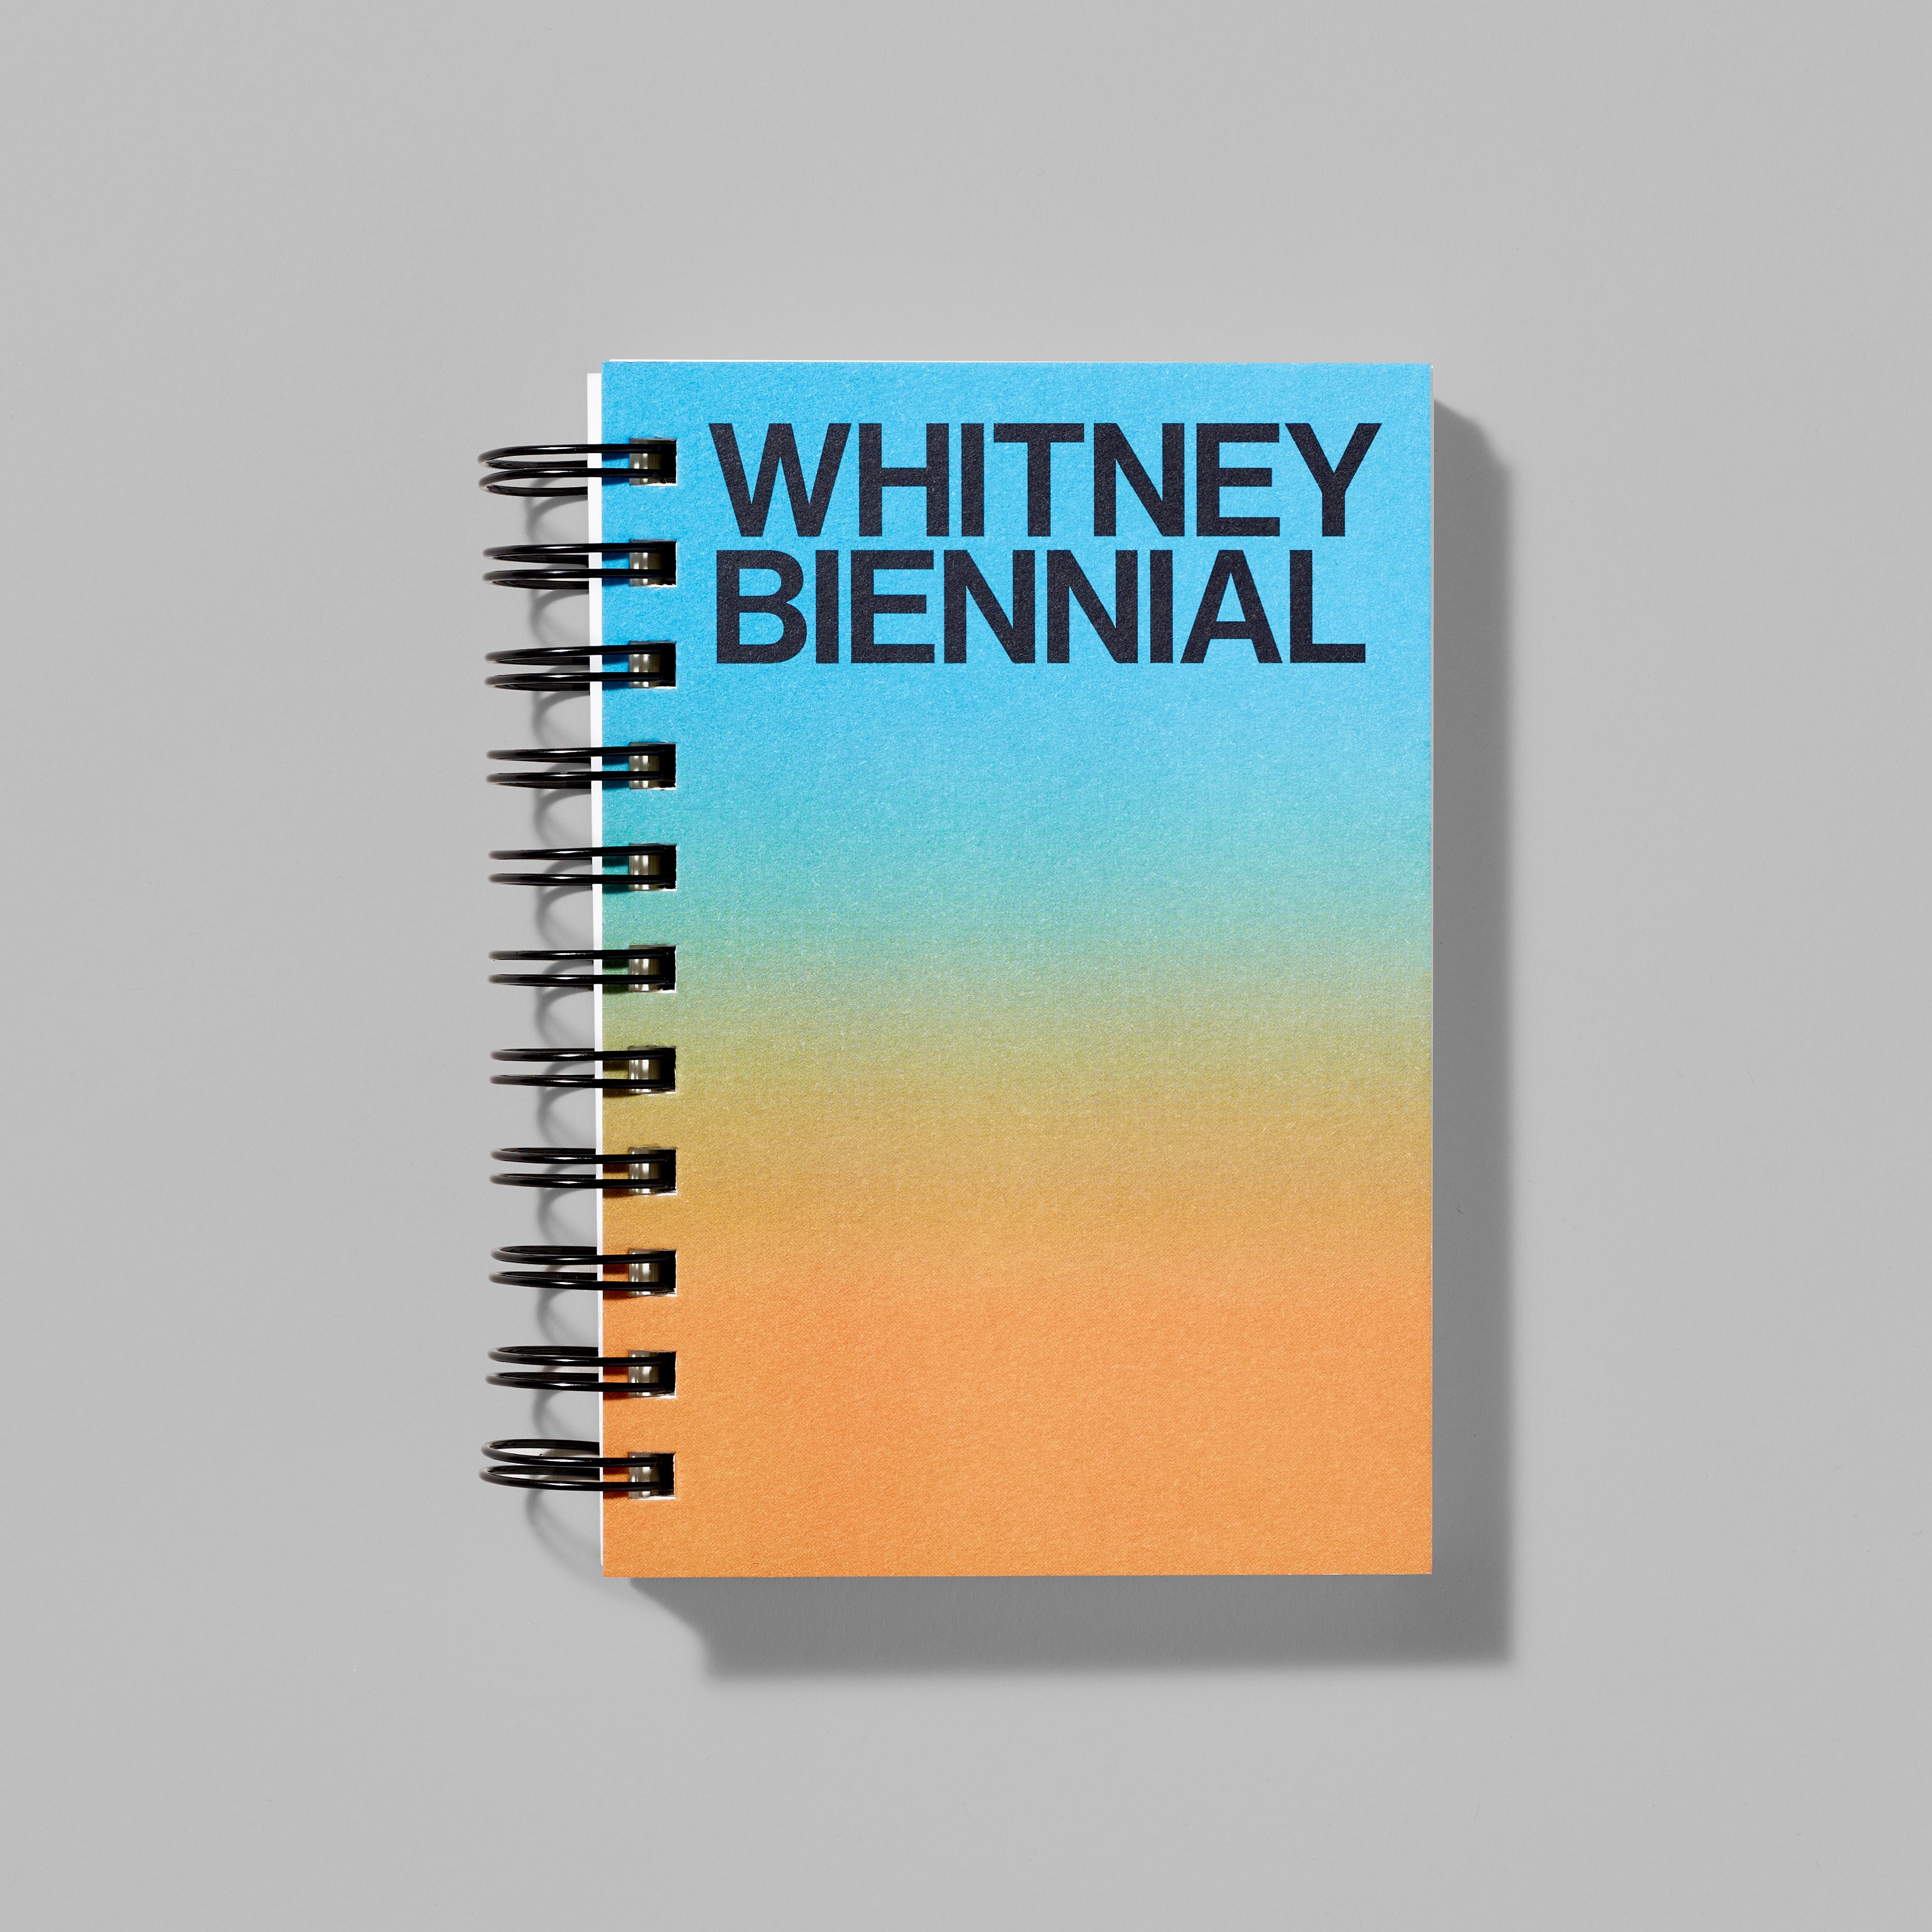 Blue and orange gradient spiral notebook featuring Whitney Biennial in black text